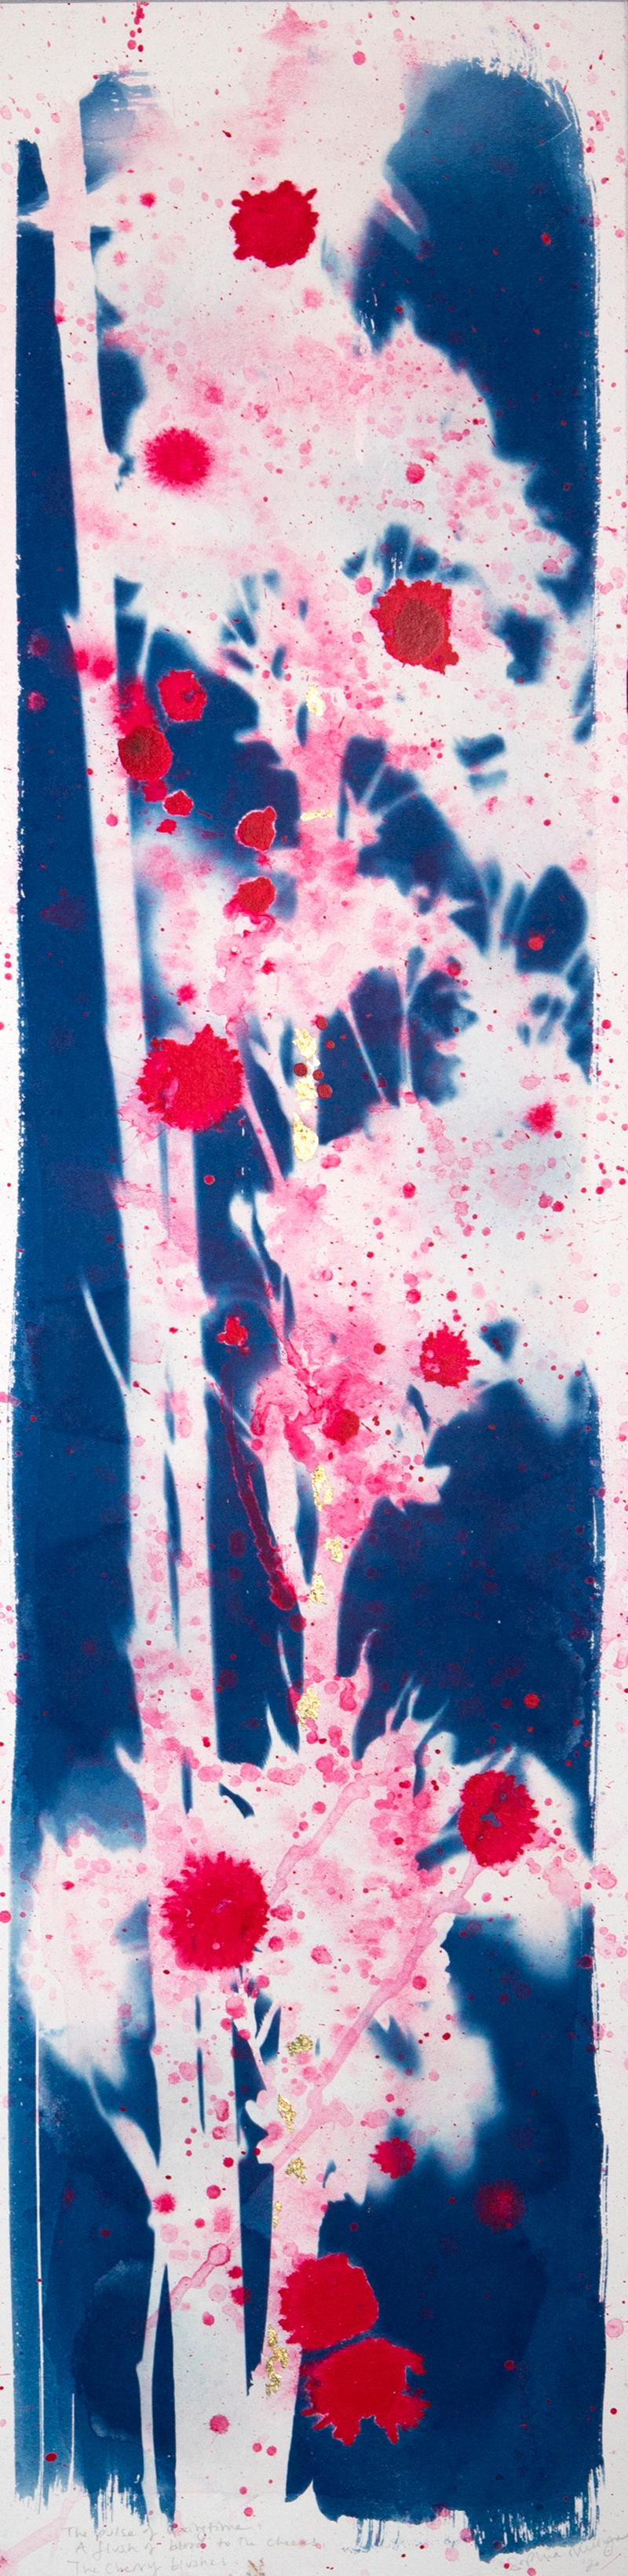 Sophia Milligan Abstract Painting - 'The Cherry Blushes' Abstract botanical sakura natural blue white pink floral